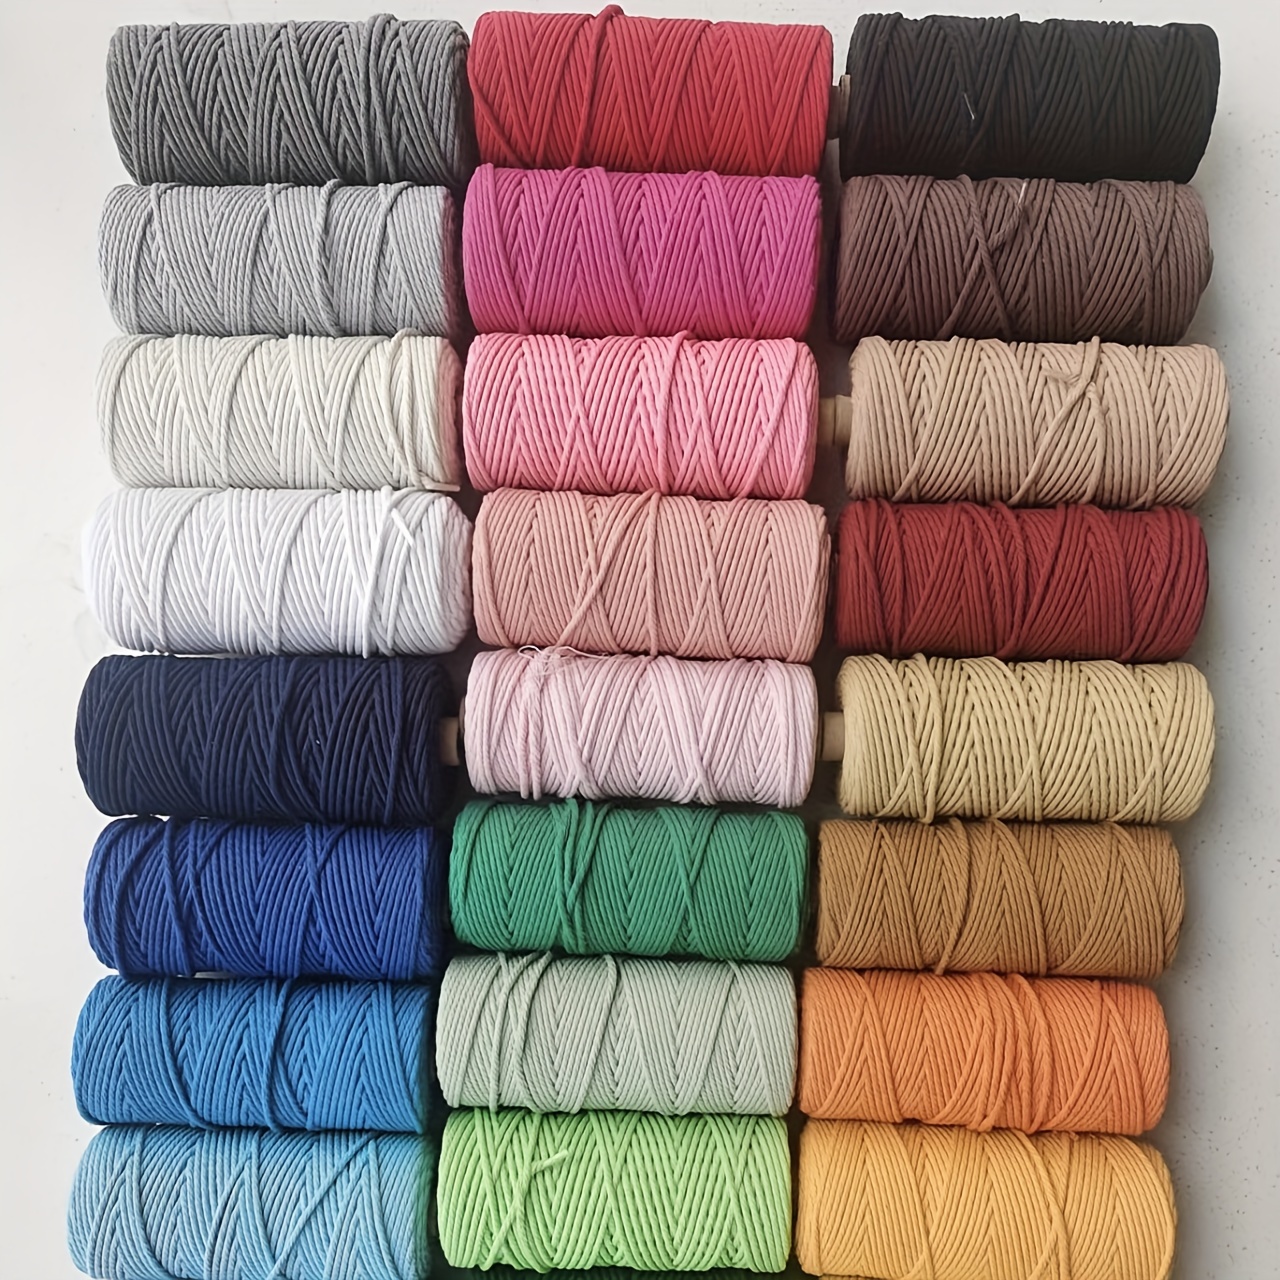 Knitting Books for Beginners Knitting Bag Yarn Storage Colorful Cotton Rope  Diy Hand Woven Thick Cotton Rope Woven Tapestry Rope Tied Rope